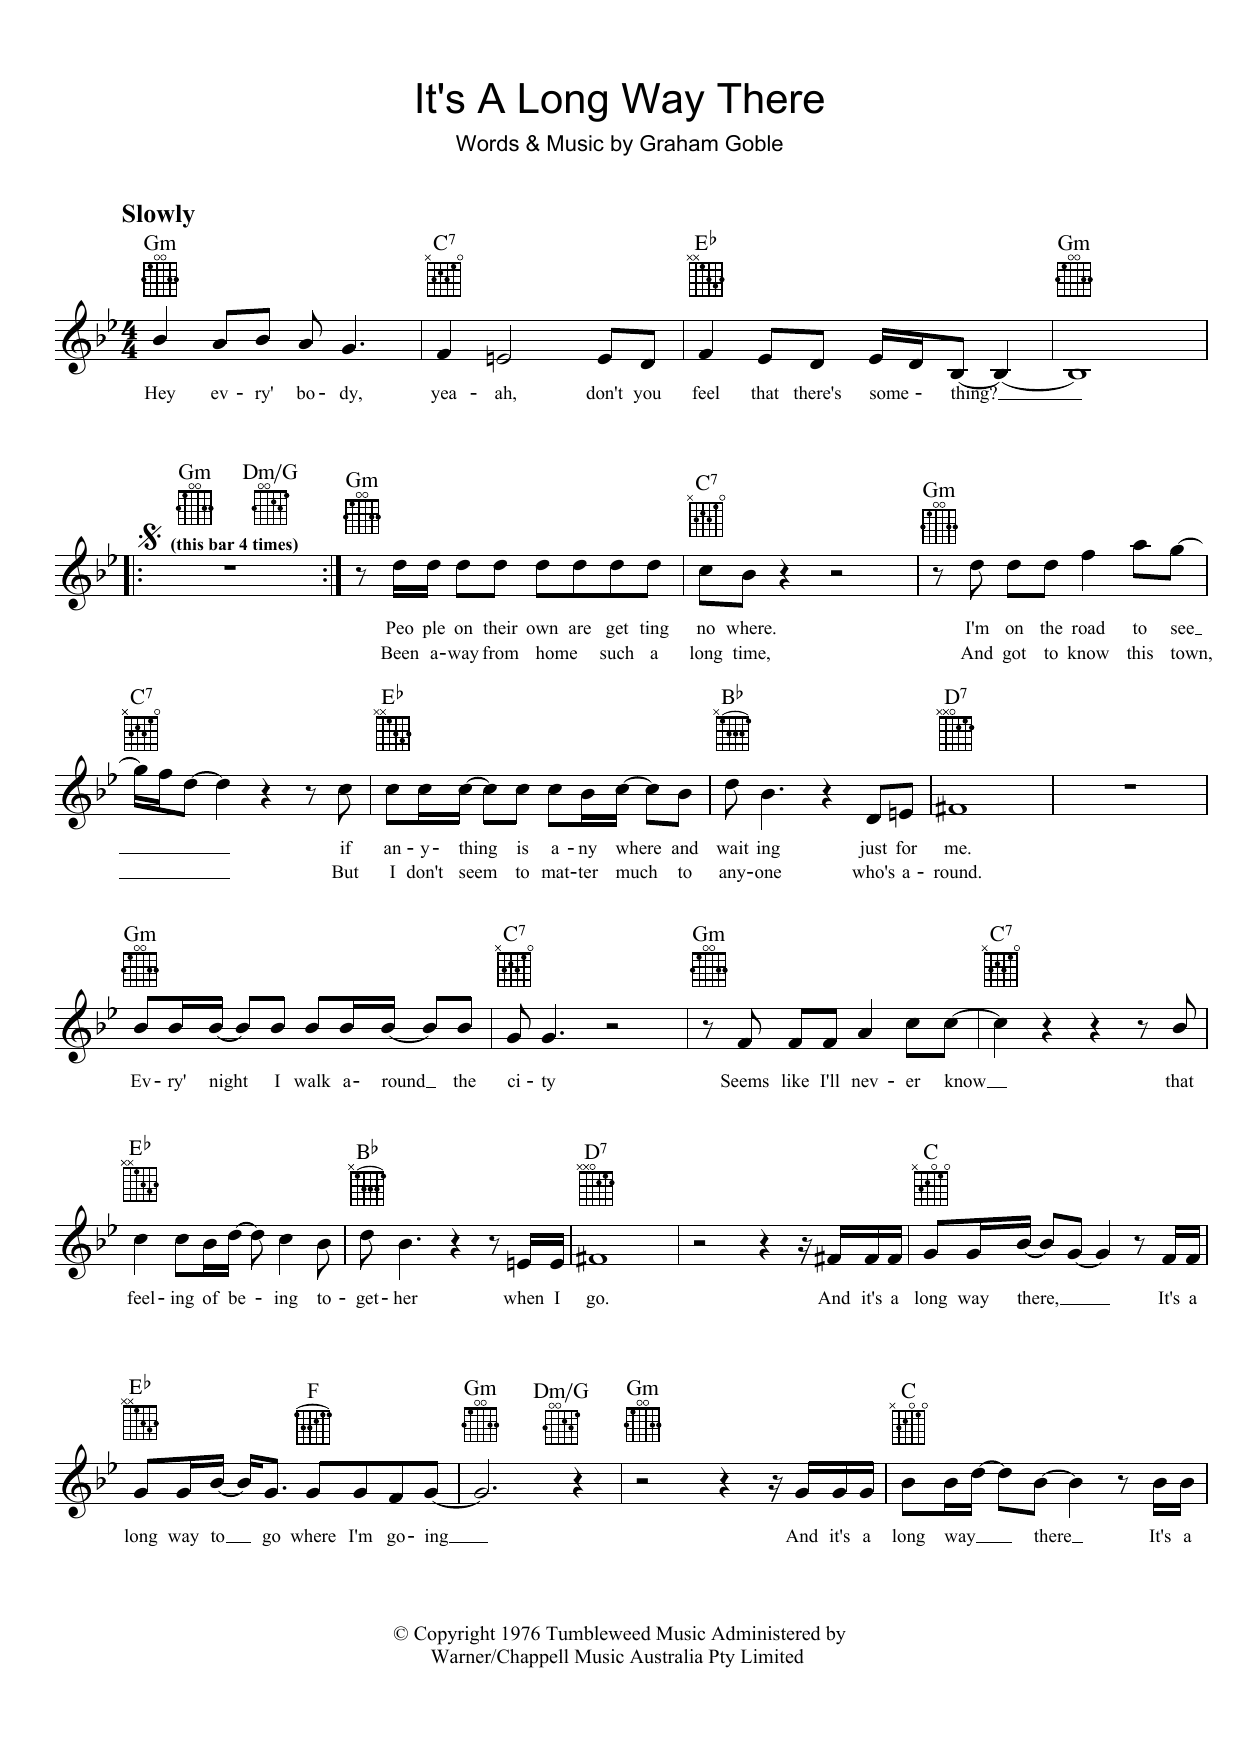 Download The Little River Band It's A Long Way There Sheet Music